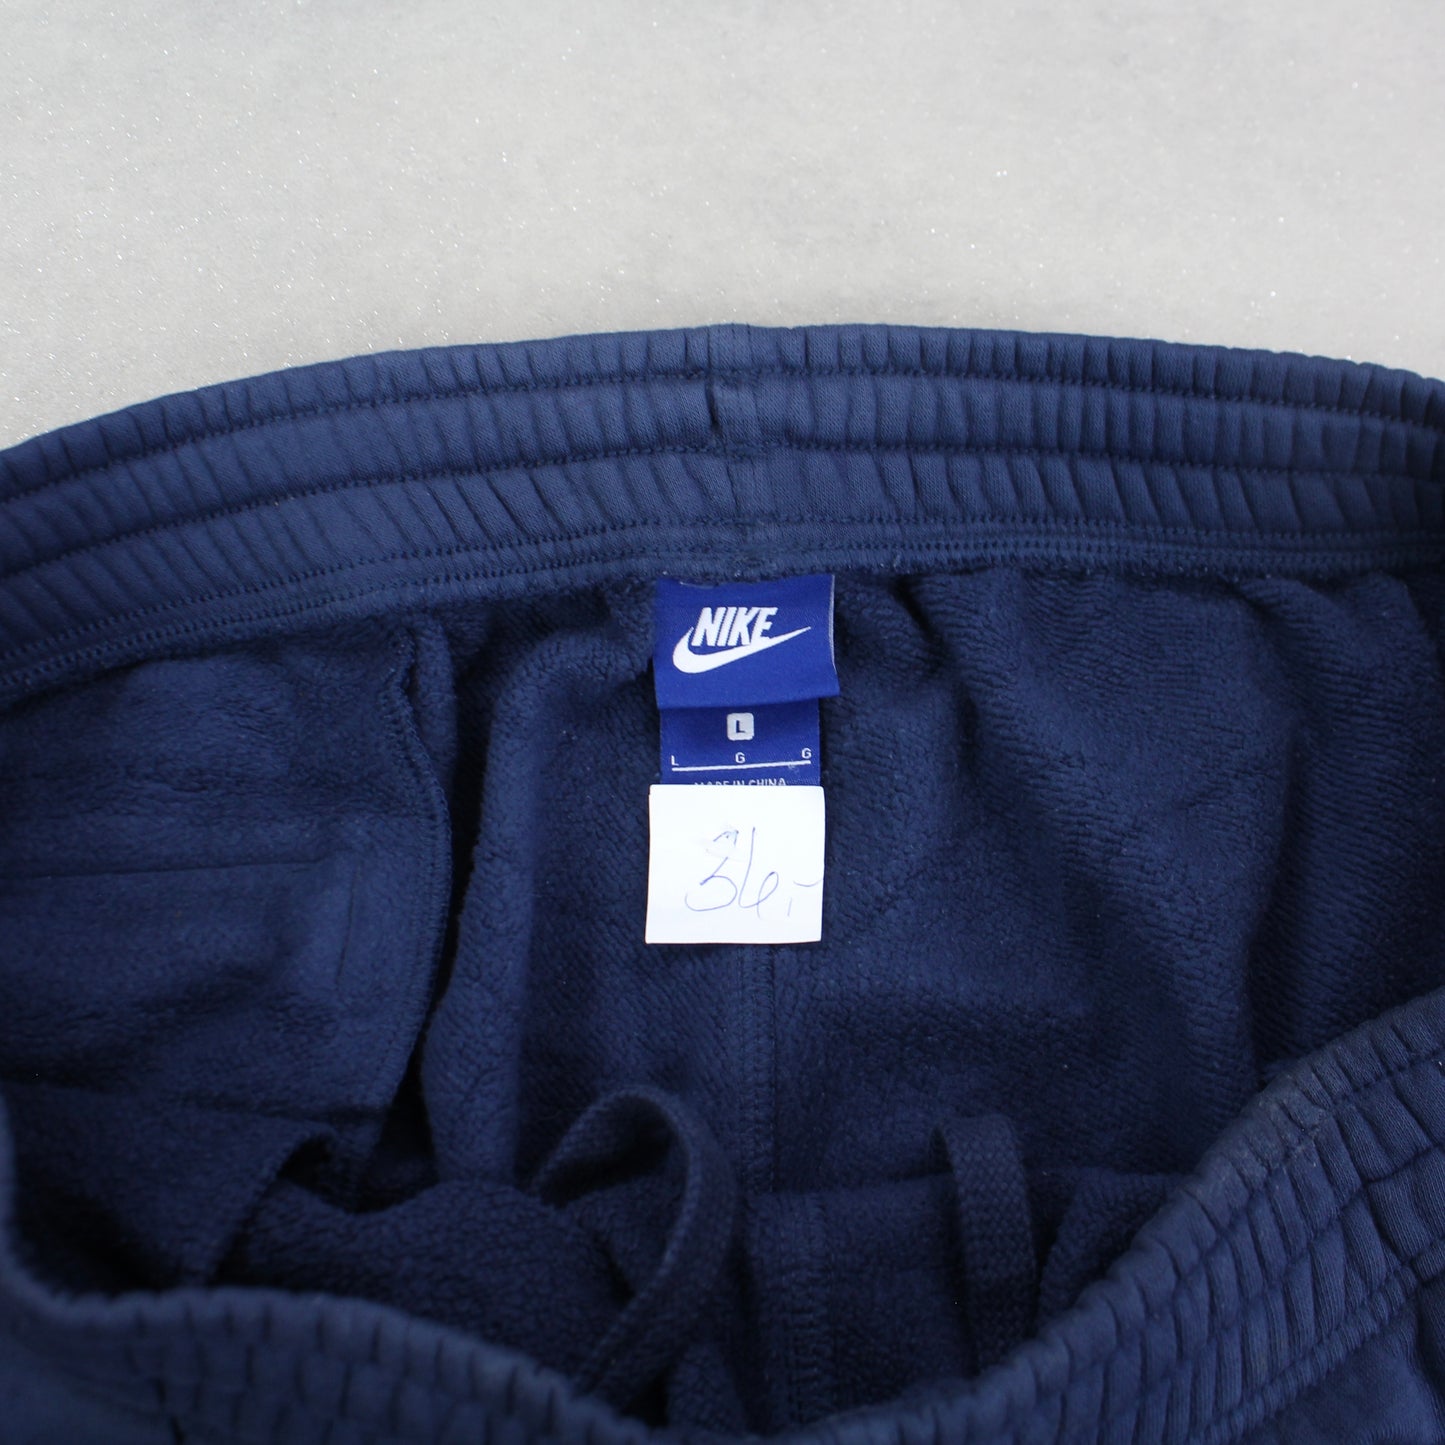 Baggy Nike Joggers Navy - (L)